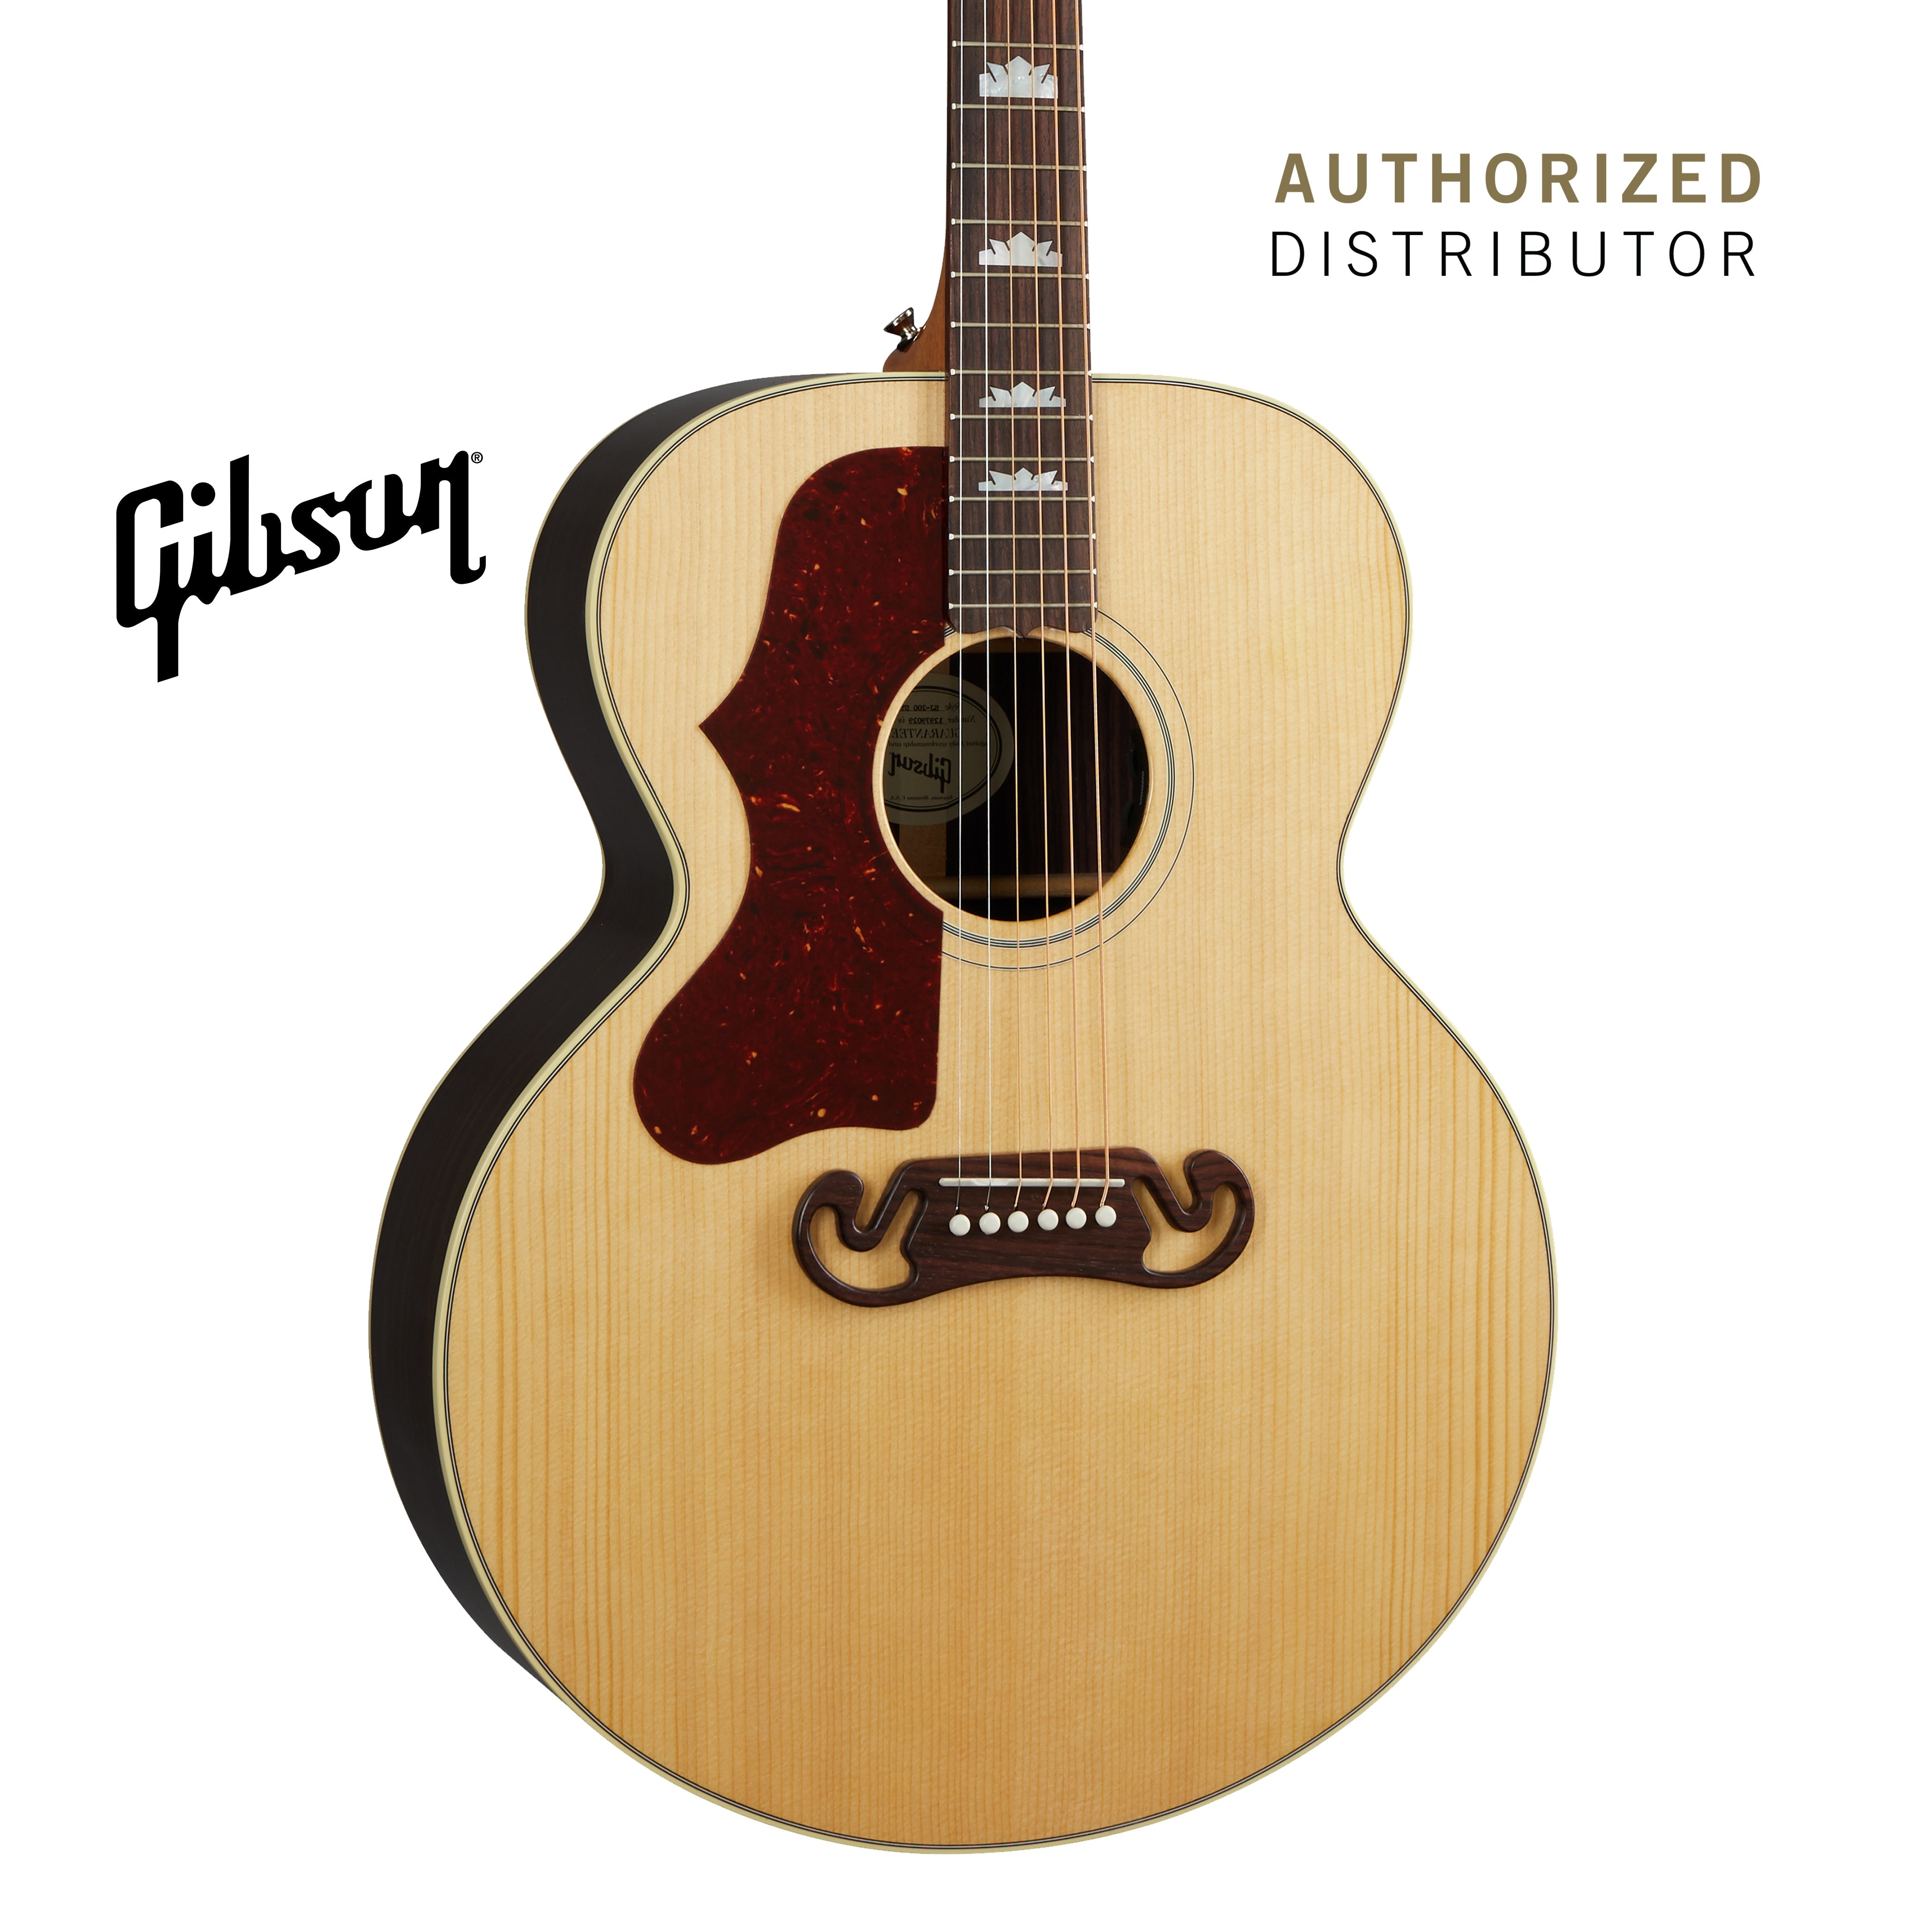 GIBSON SJ-200 MONARCH ROSEWOOD LEFT-HANDED ACOUSTIC GUITAR - ANTIQUE NATURAL